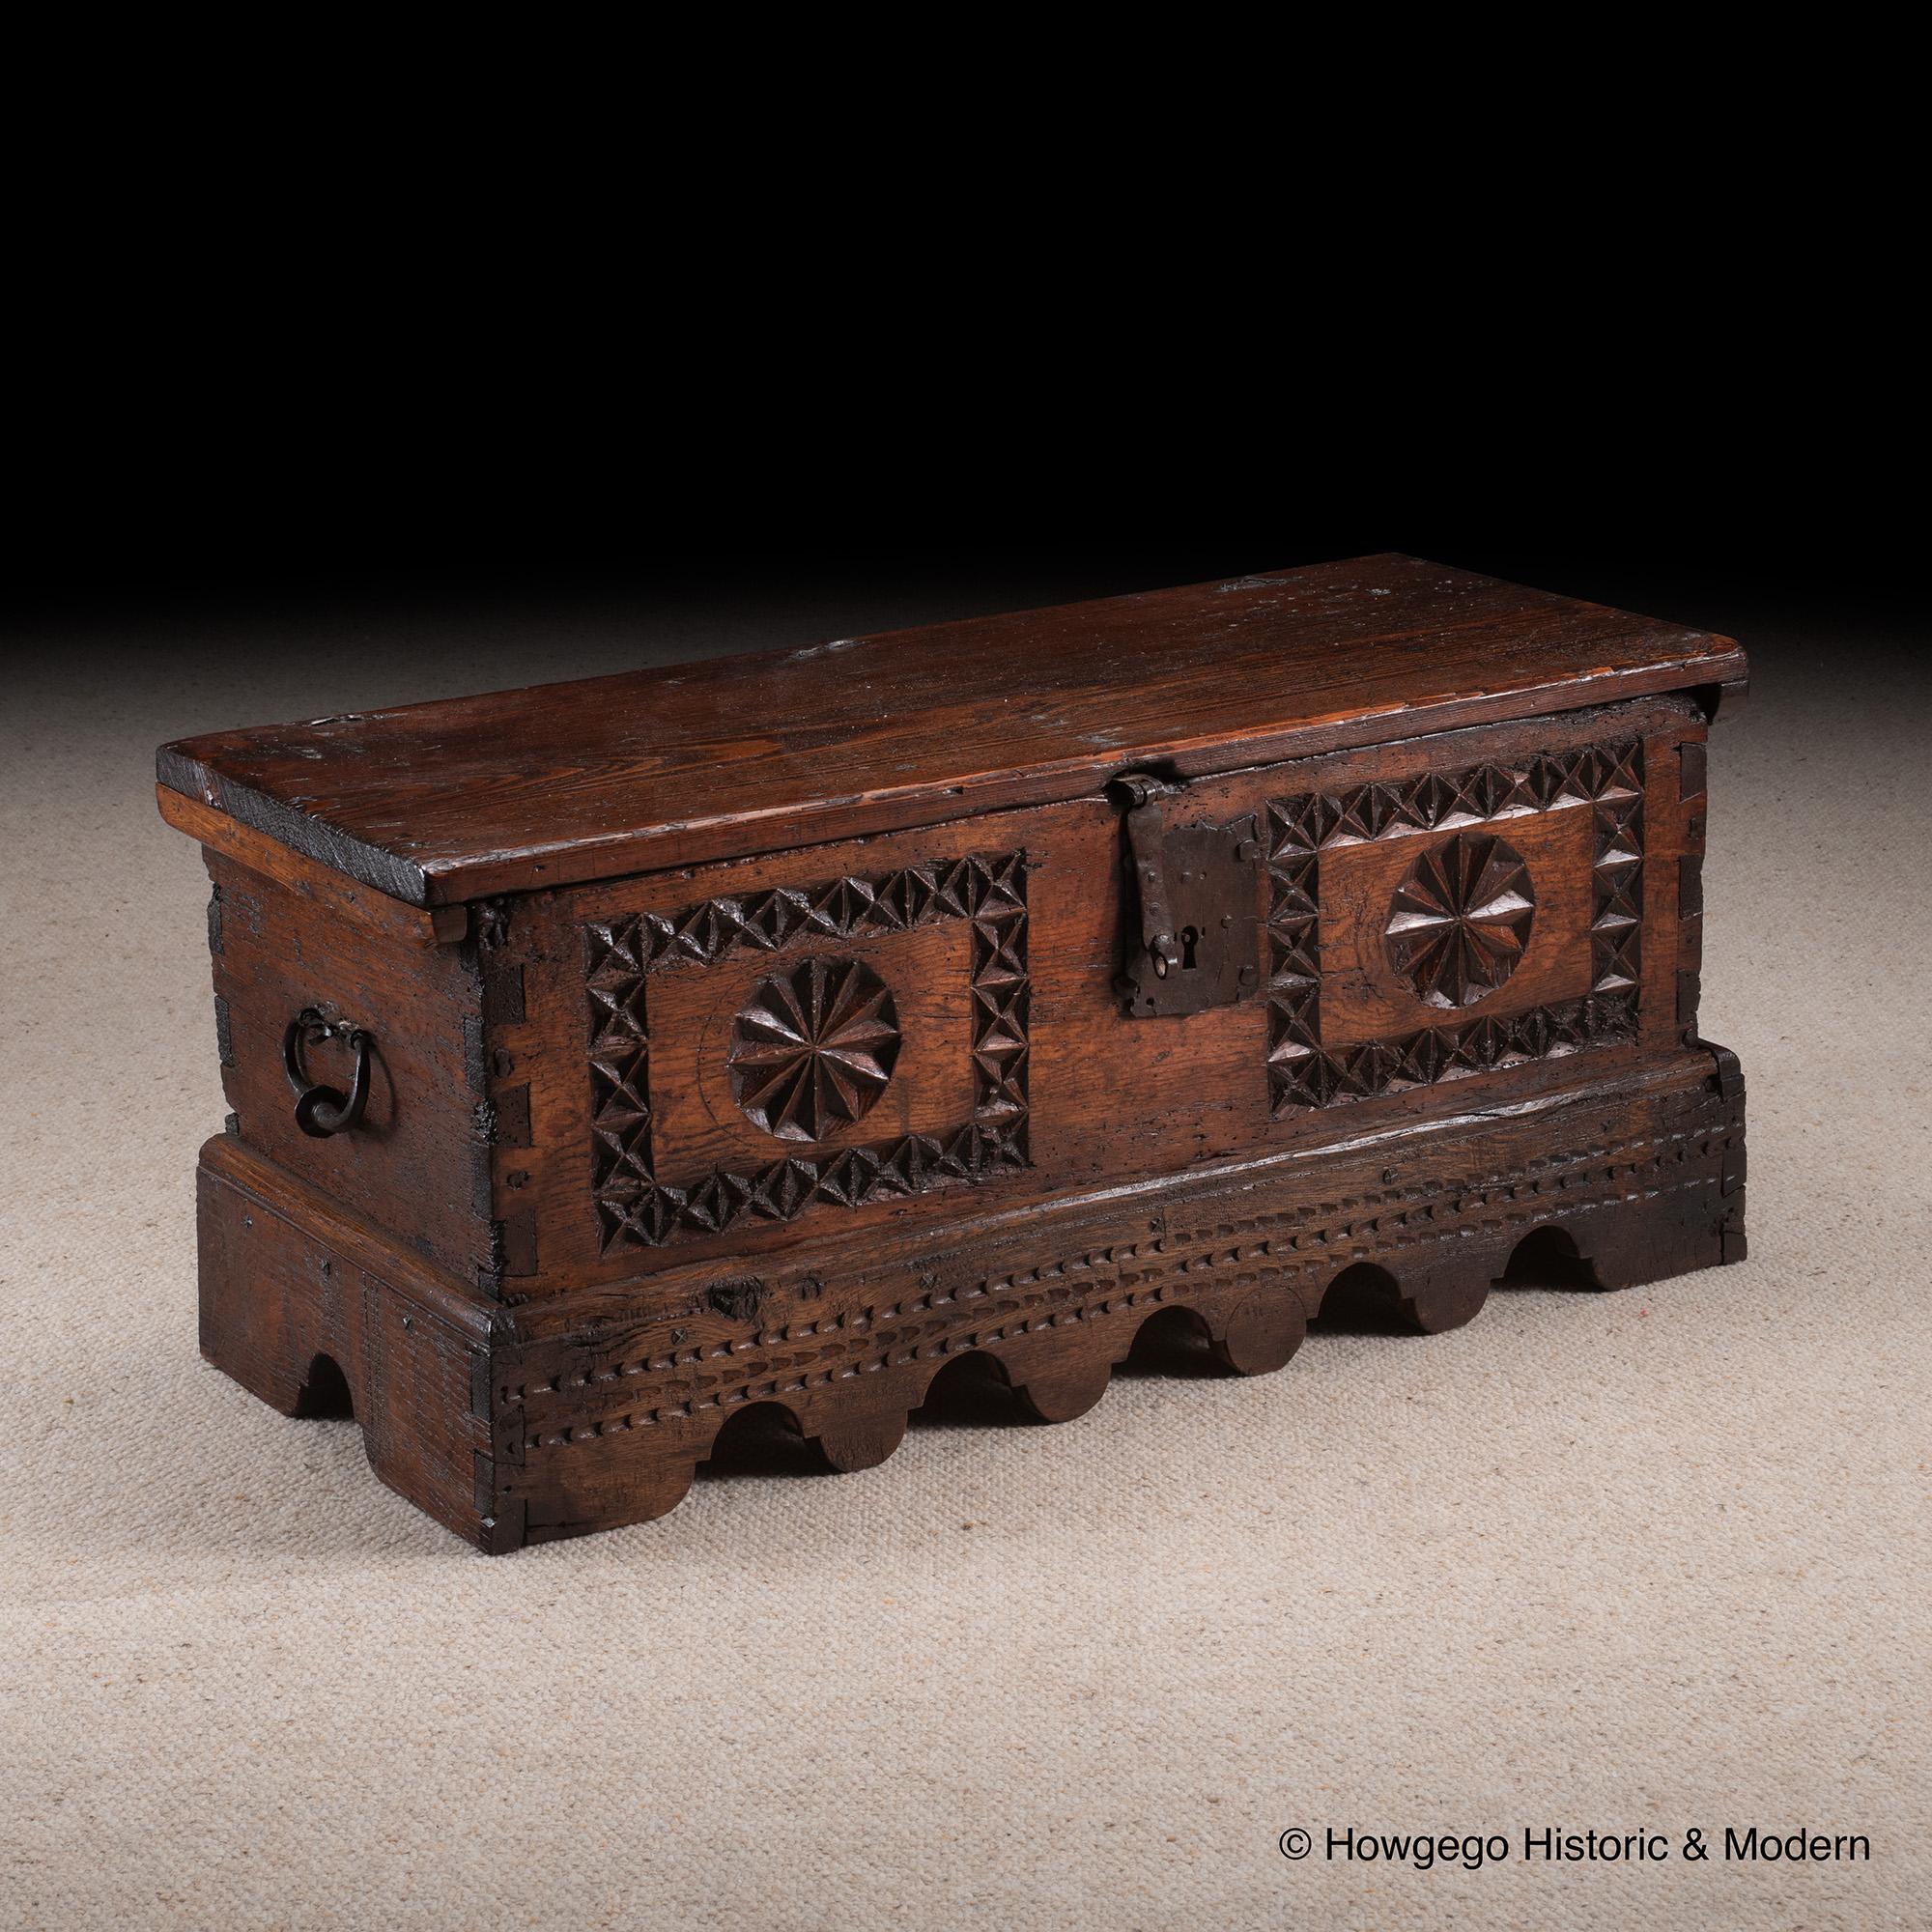 - Rare small size, would work as a sofa or low table with the advantage of storage space
- Characterful chip carving, ironwork and figuring injecting atmosphere into any interior
- Warm, rich, lustrous color and patina.

Single plank top with fine